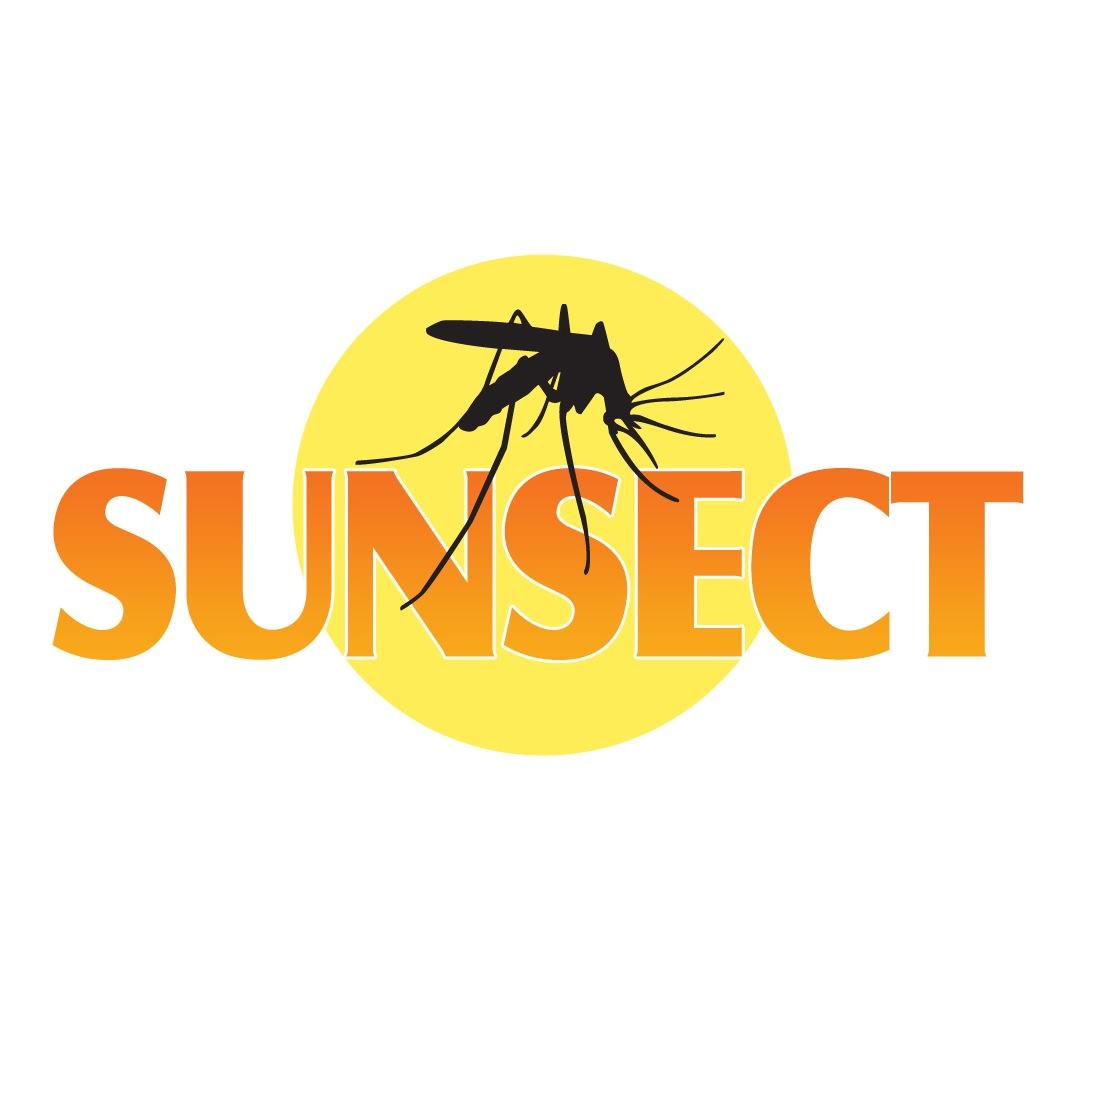 Sunsect is a patented insect repellent + sunscreen combination product that provides lasting protection against biting insects and damaging sunrays.